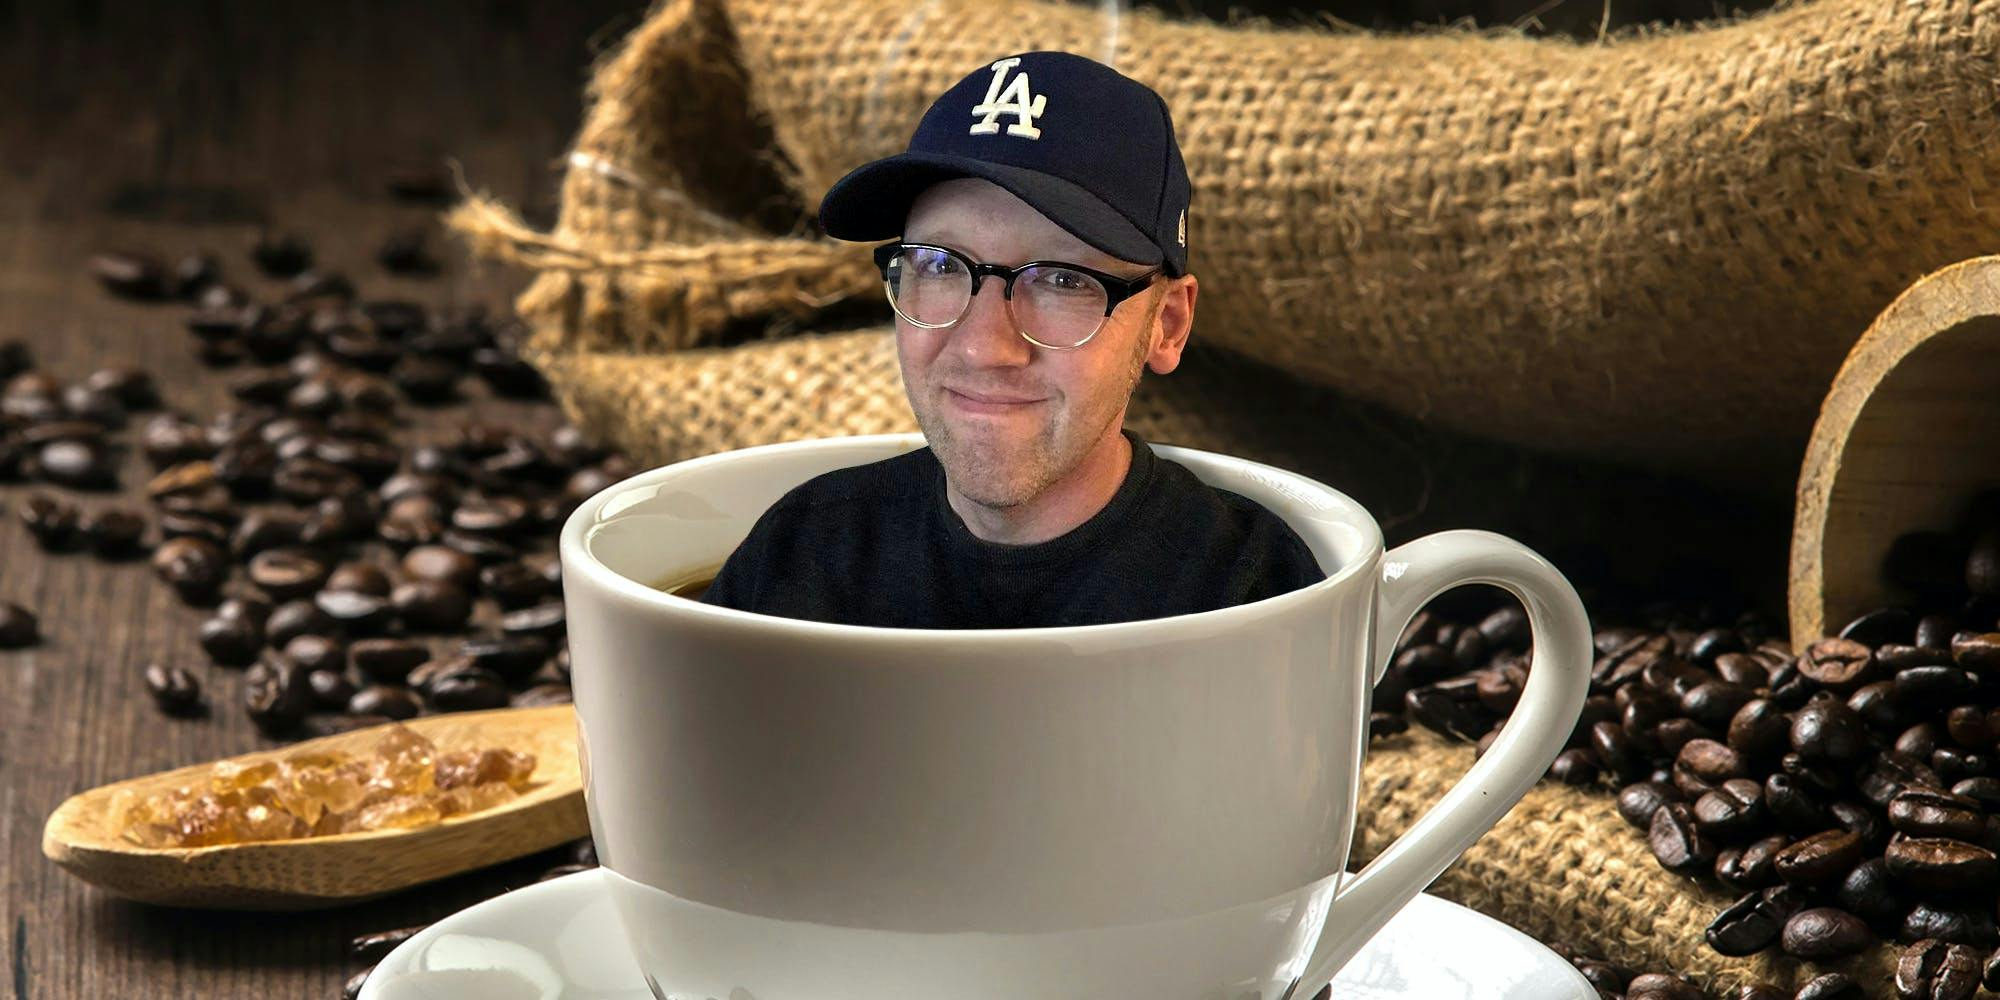 Creator of popular baseball newsletter Cup of Coffee tells us how he starts his day online